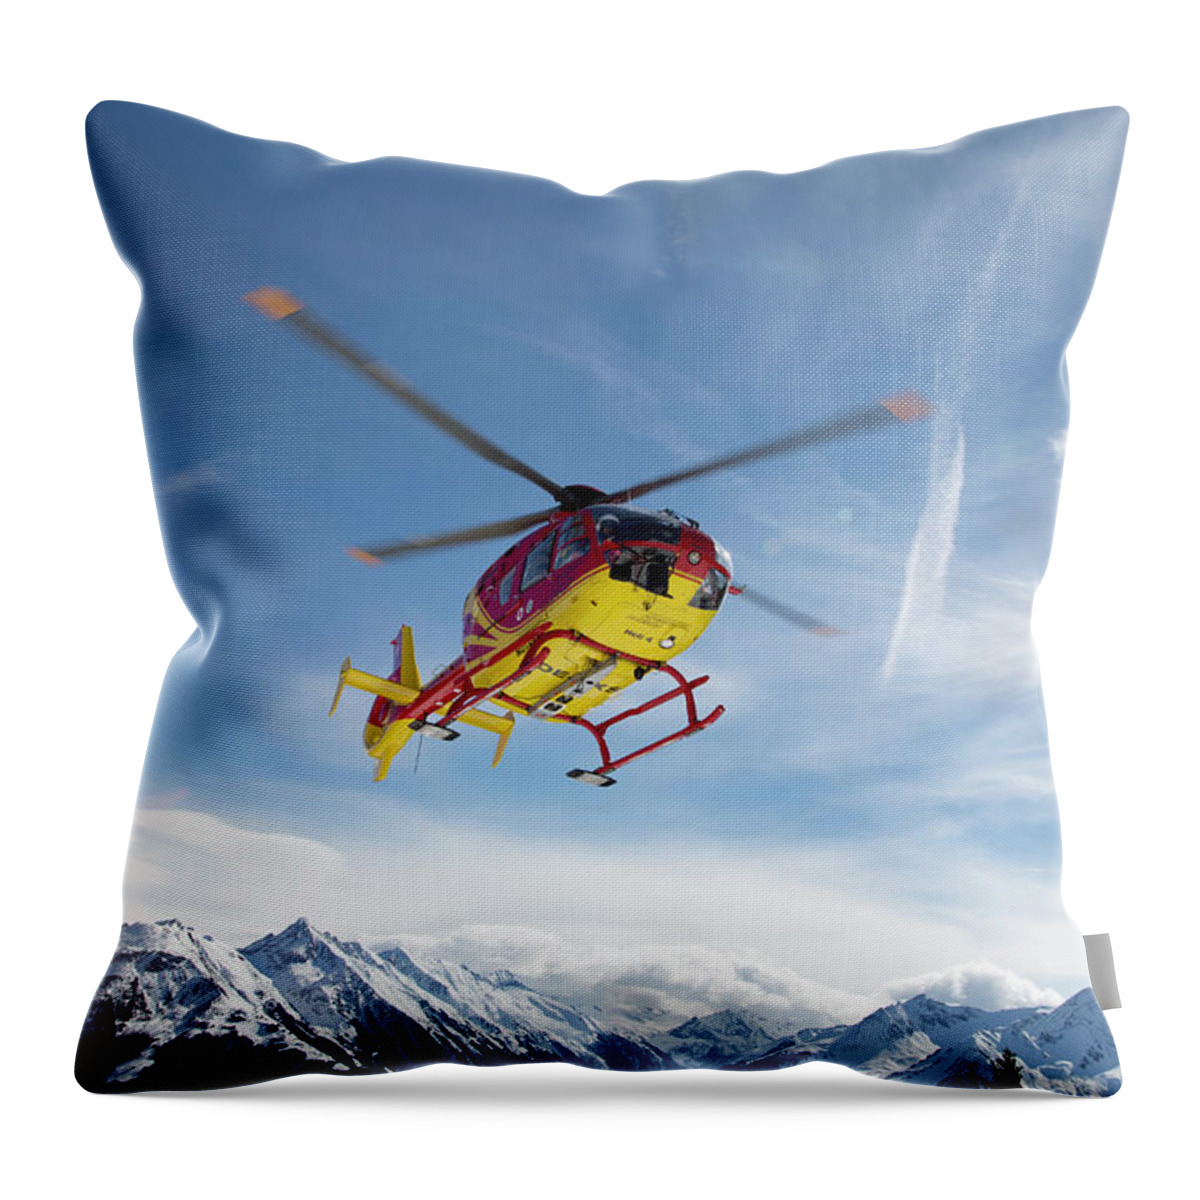 Snow Throw Pillow featuring the photograph Helicopter In The Mountains by Chris Tobin